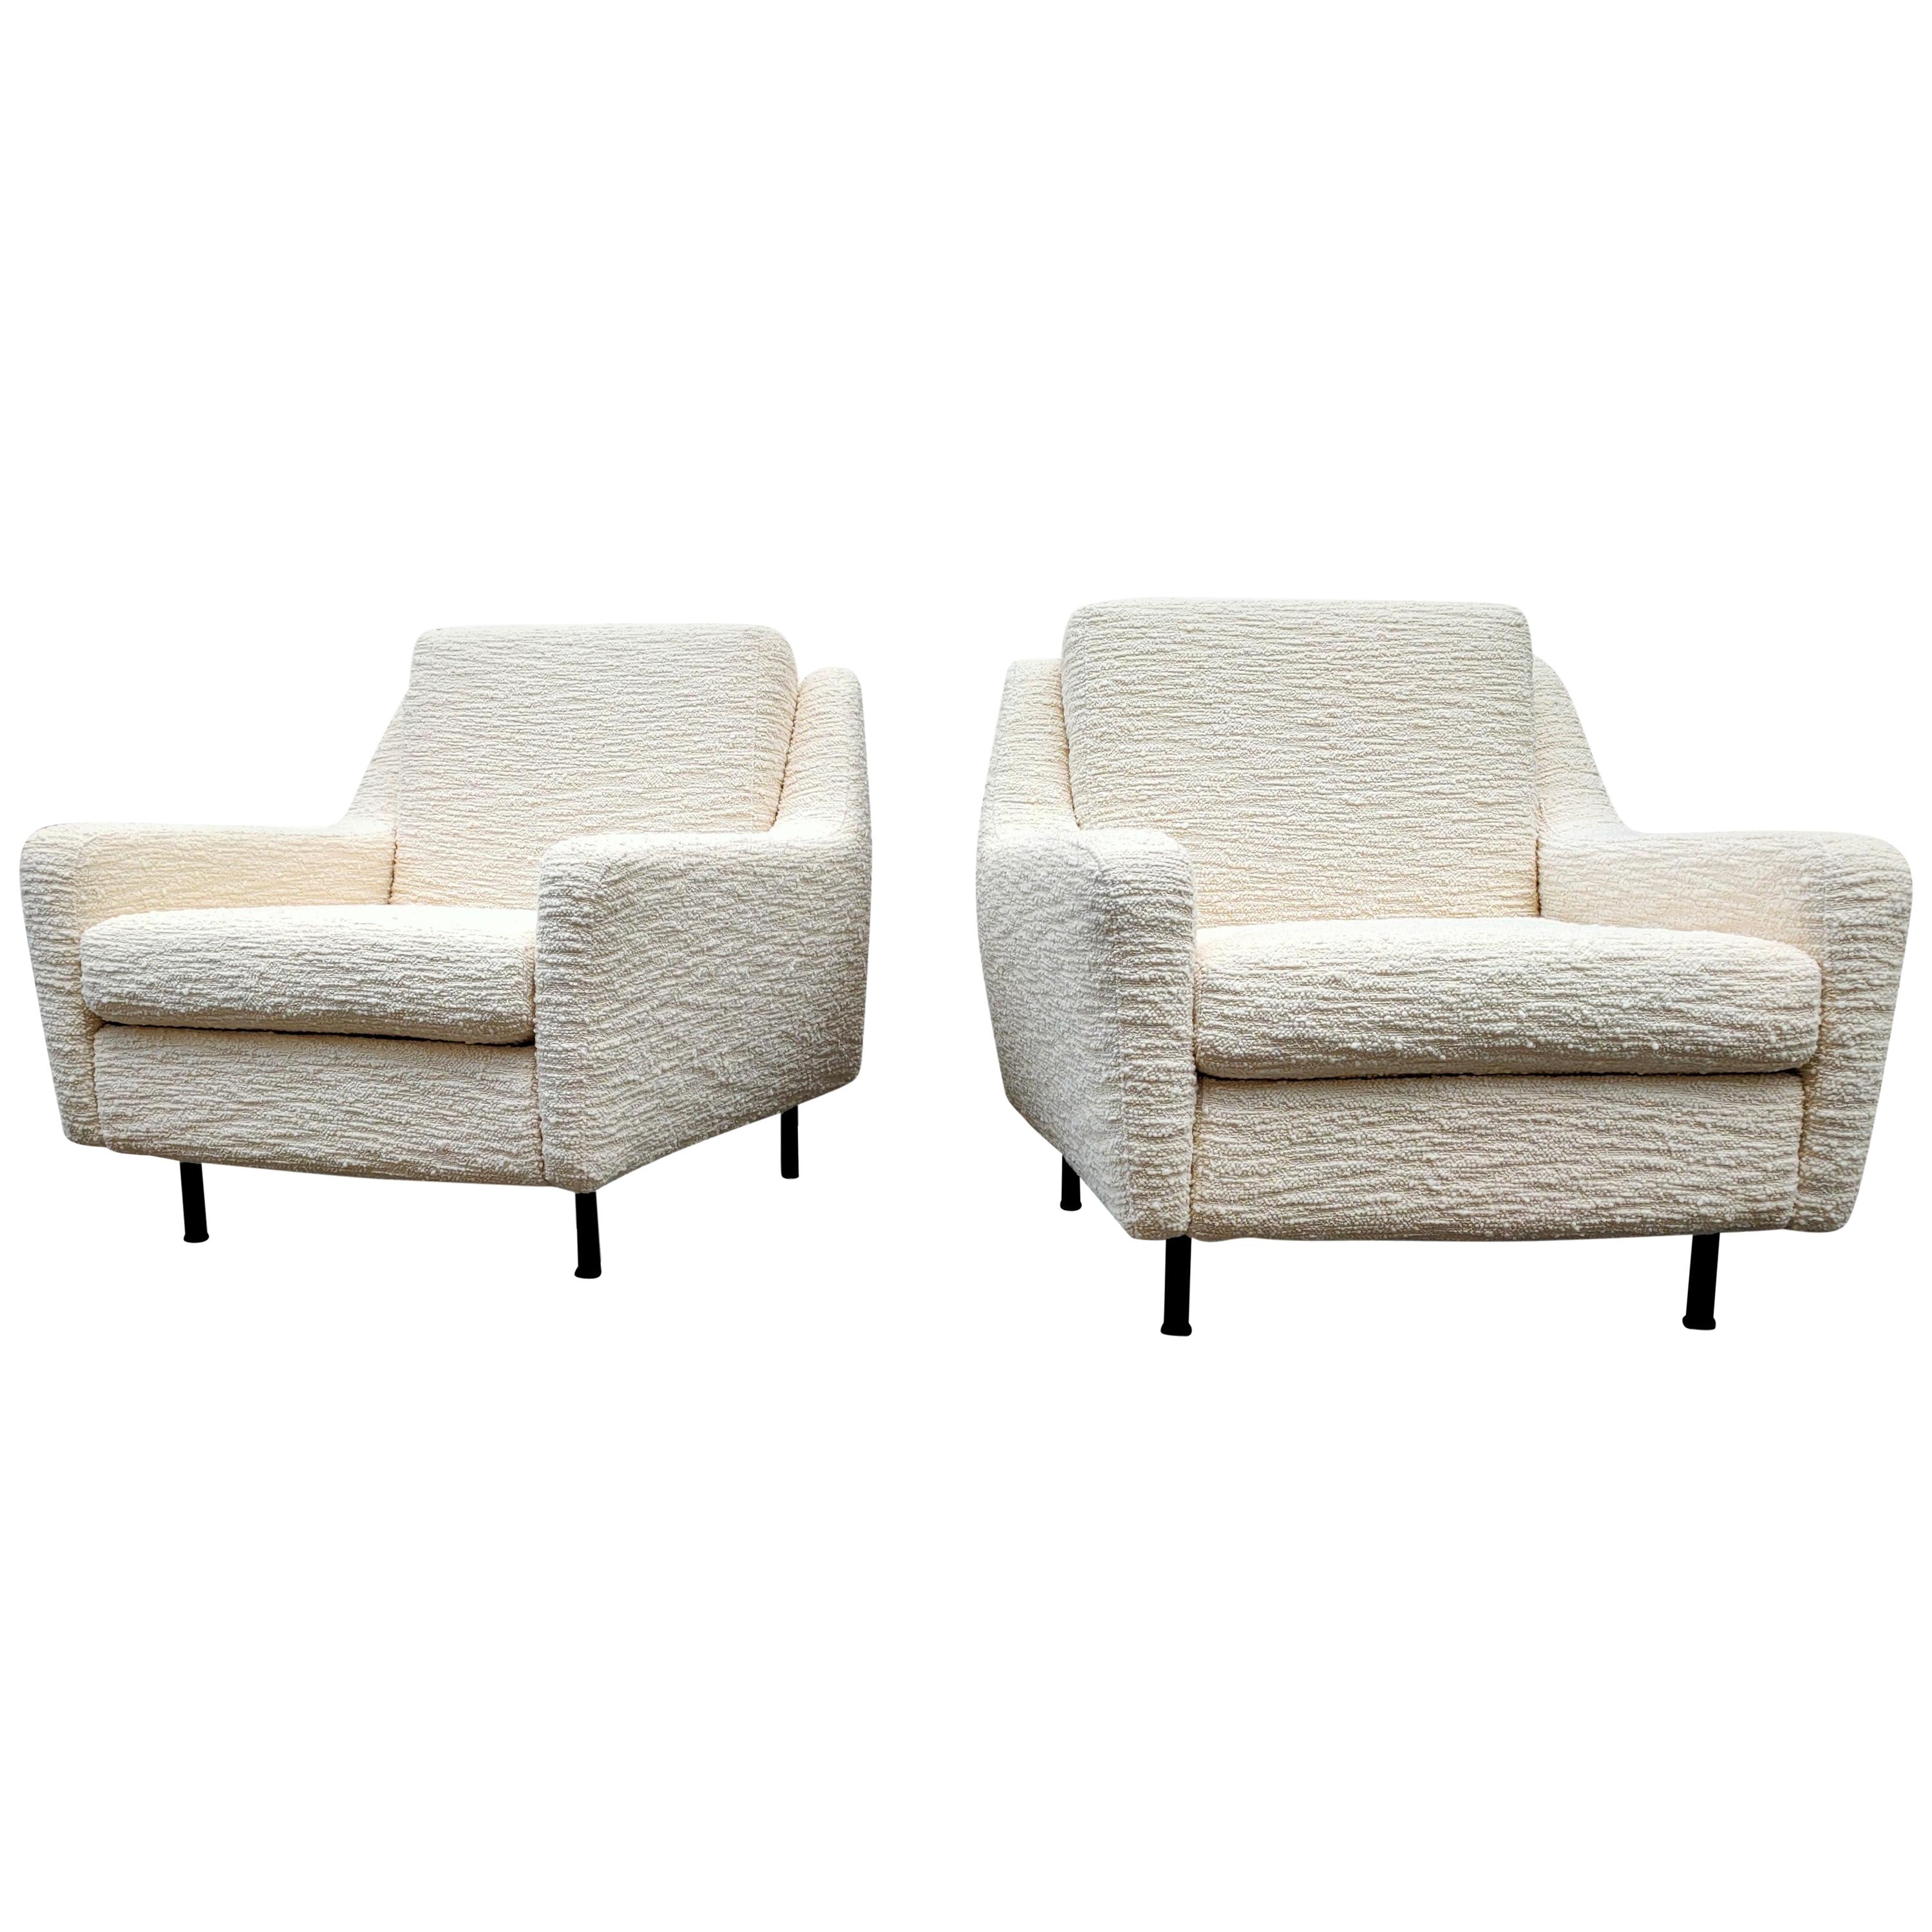 Pair of 1970s Italian Armchairs in Creme "Bouclé" Upholstery, Italy, 1970s